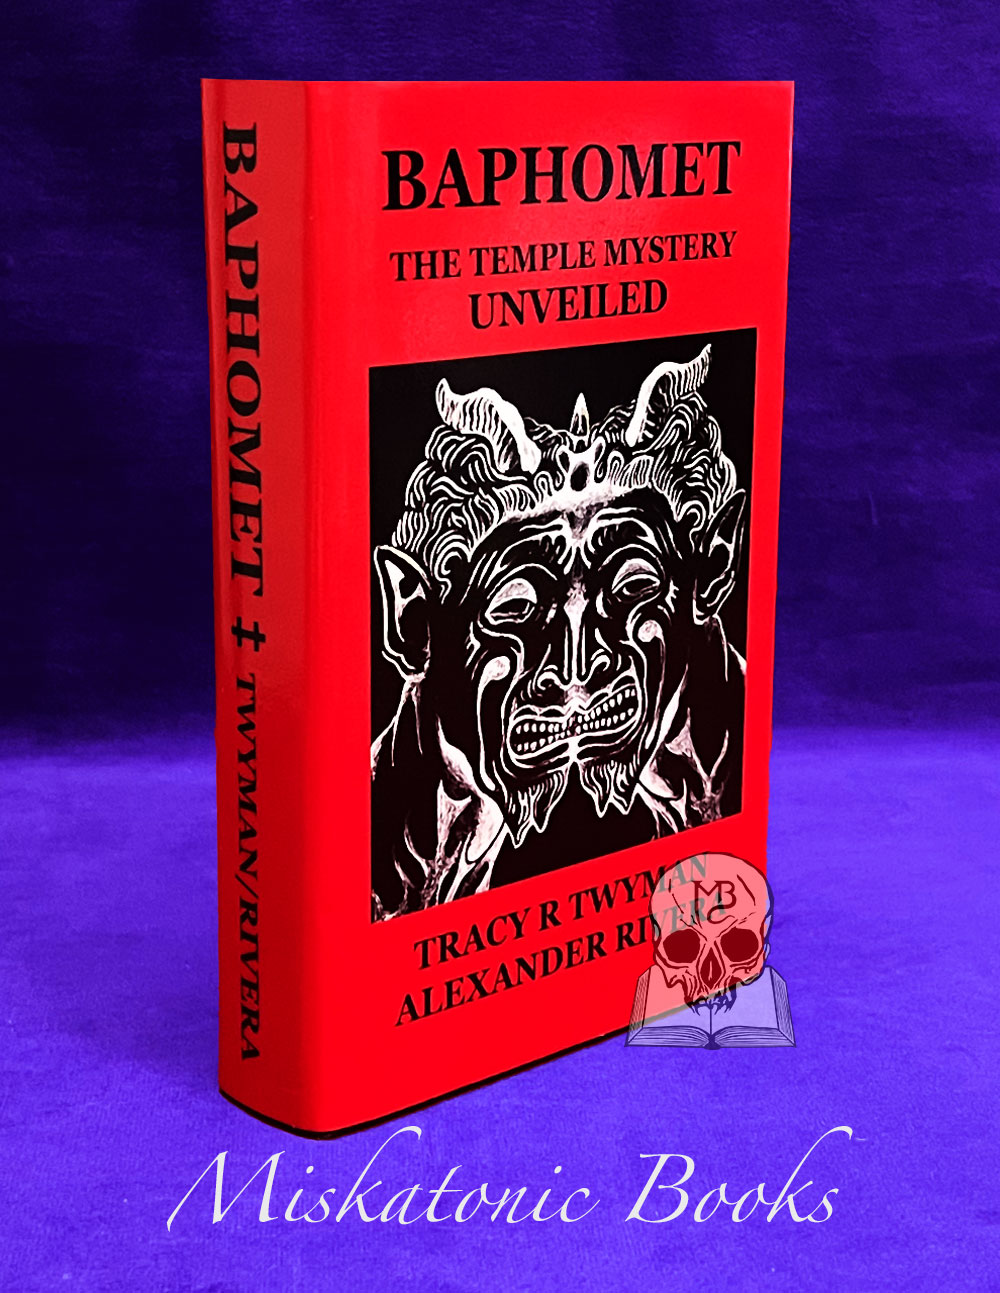 BAPHOMET: The Temple Mystery Unveiled by Tracy R Twyman & Alexander Rivera - Hardcover Edition